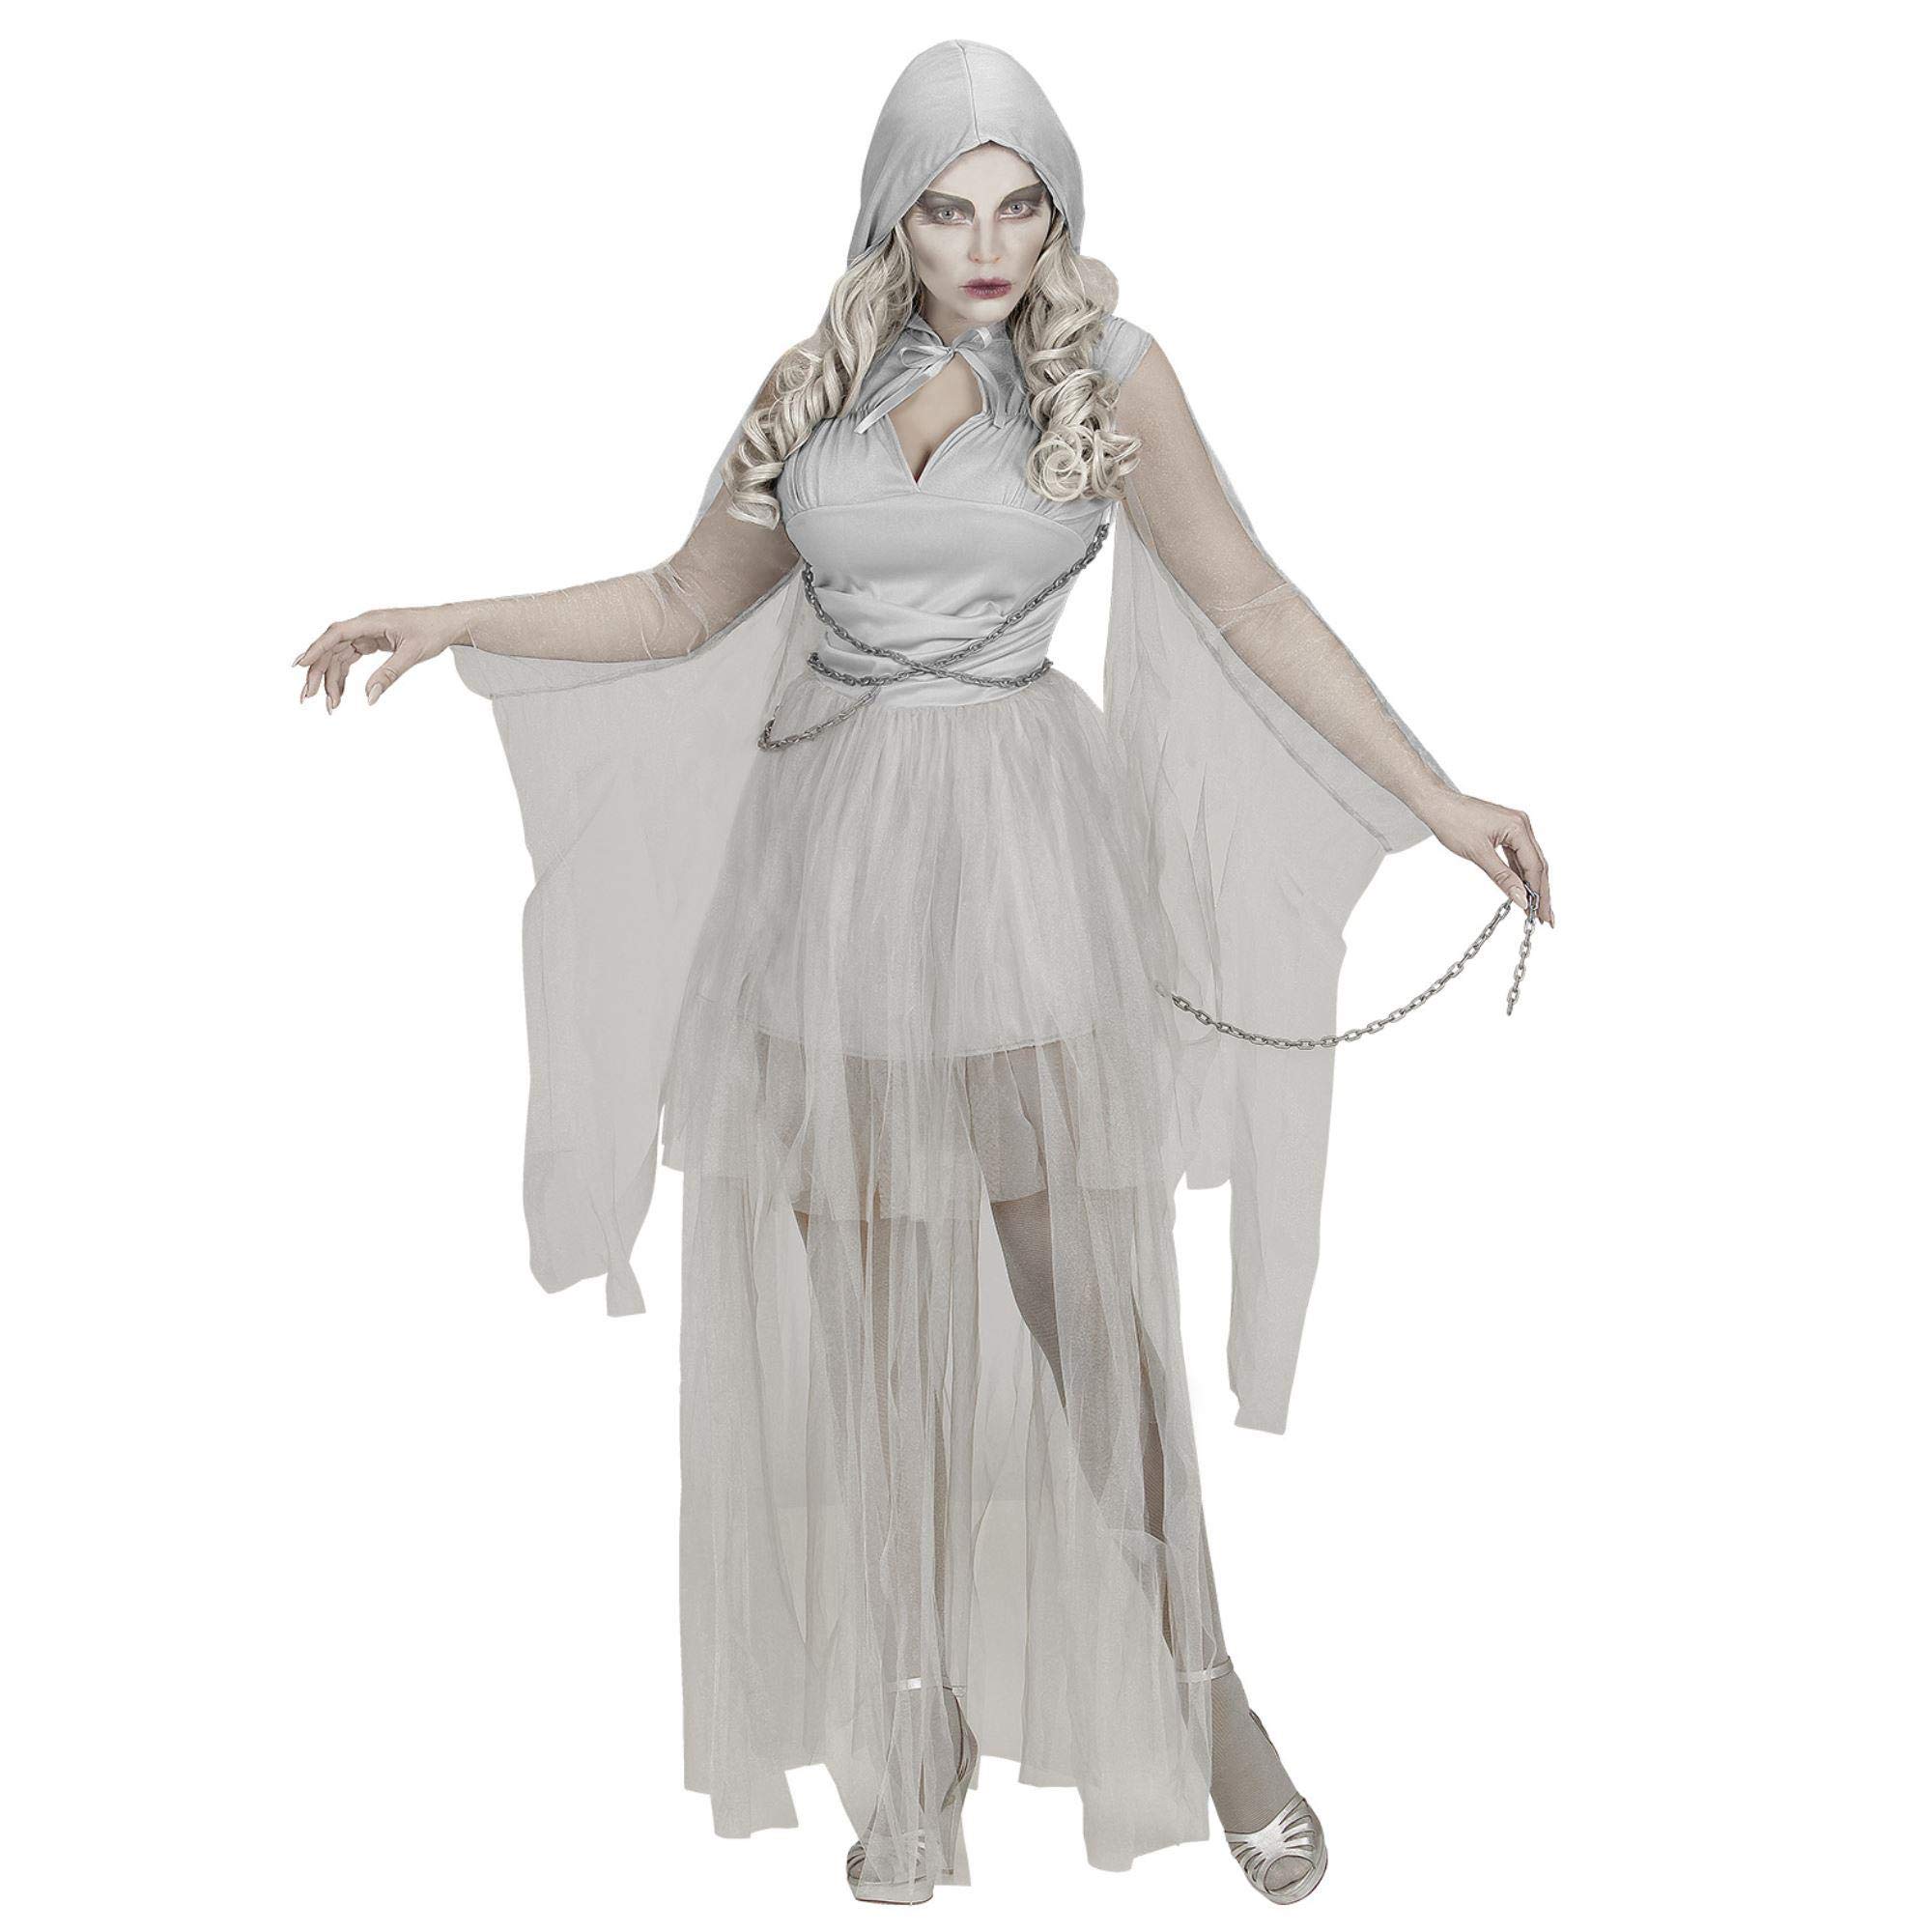 "CHAINED GHOSTLY SPIRIT" (hooded dress, chains) - (L)